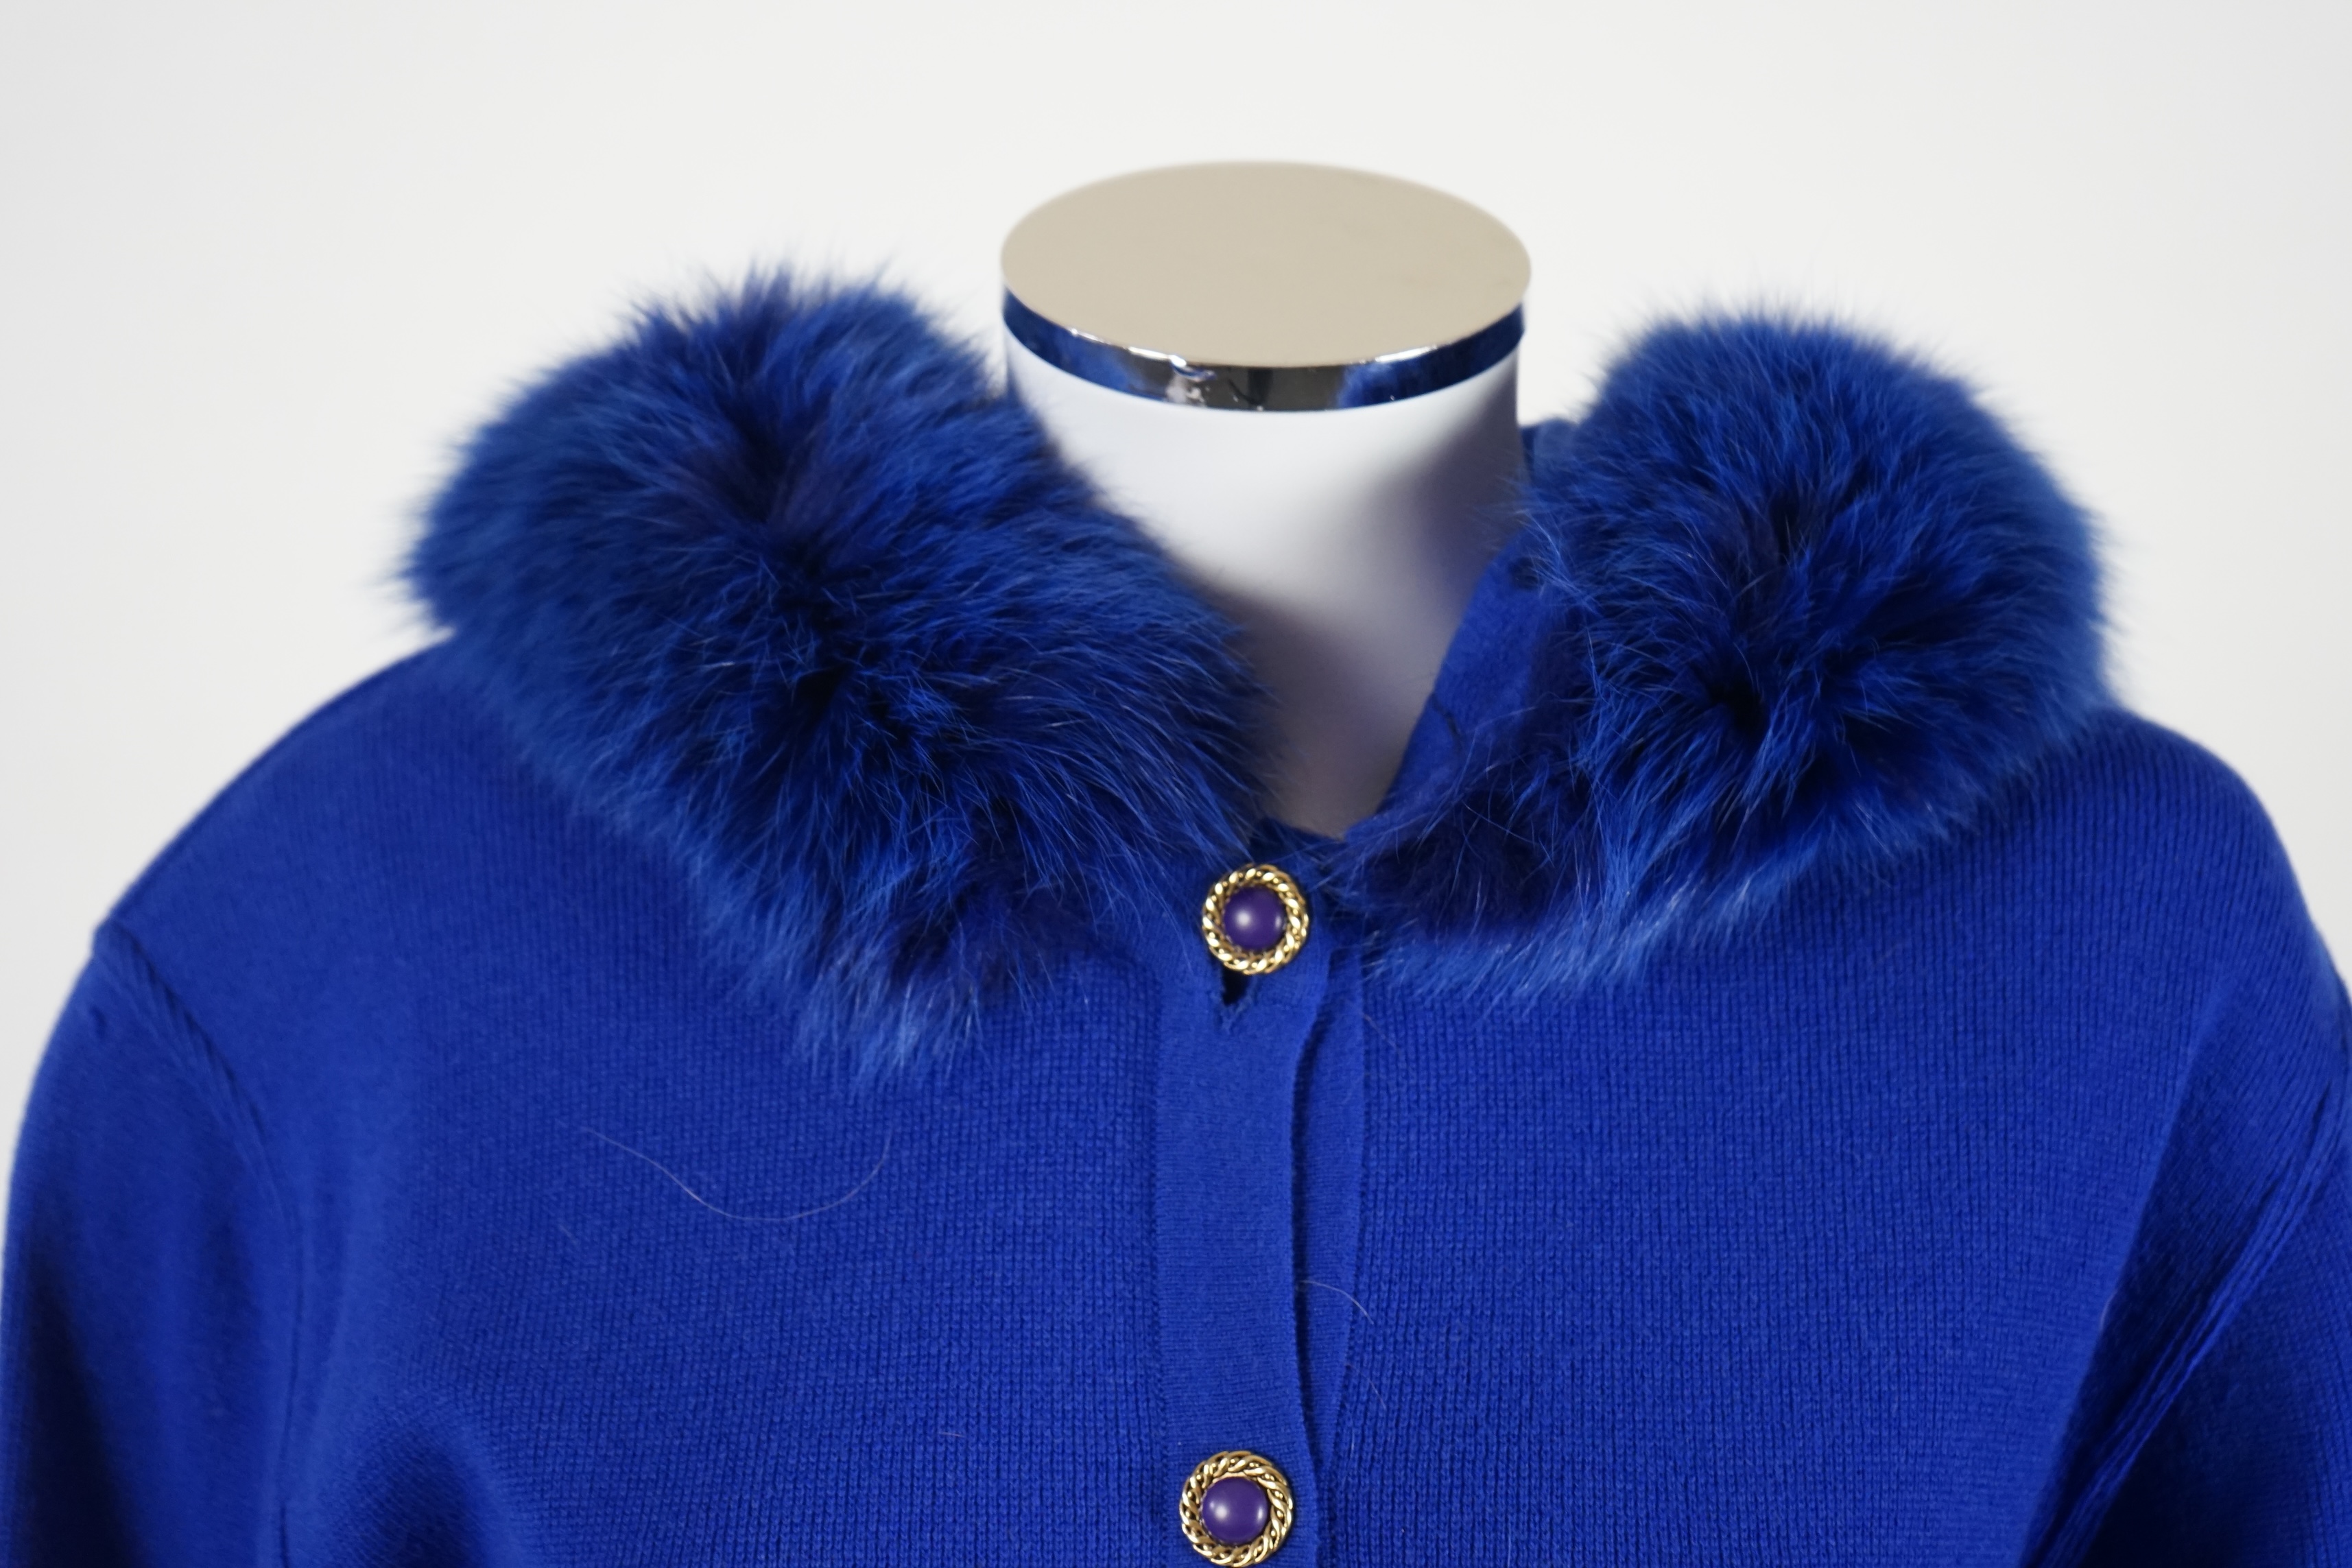 A Vera da Pozzo knitted royal blue suit with fur detail, knitted dress with fur cuffs and additional knitted skirt. Approx size 10-12 Proceeds to Happy Paws Puppy Rescue